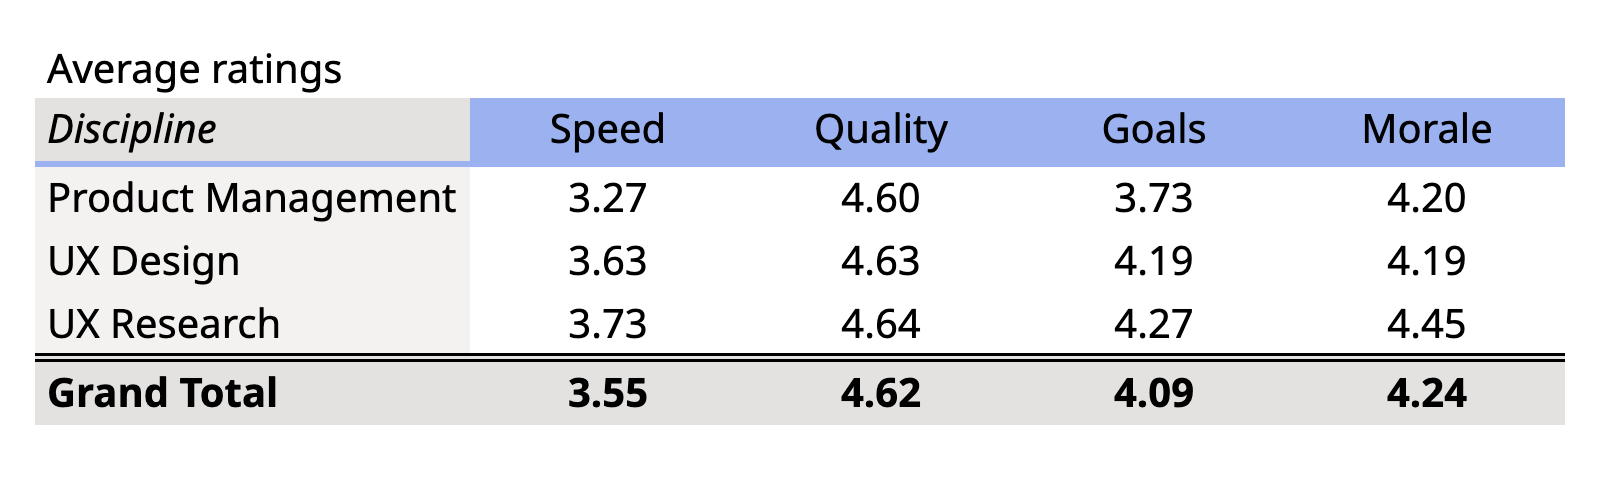 The average reported effect of a content designer on speed was 3.55, on quality 4.62, on goals 4.09, and on morale 4.24